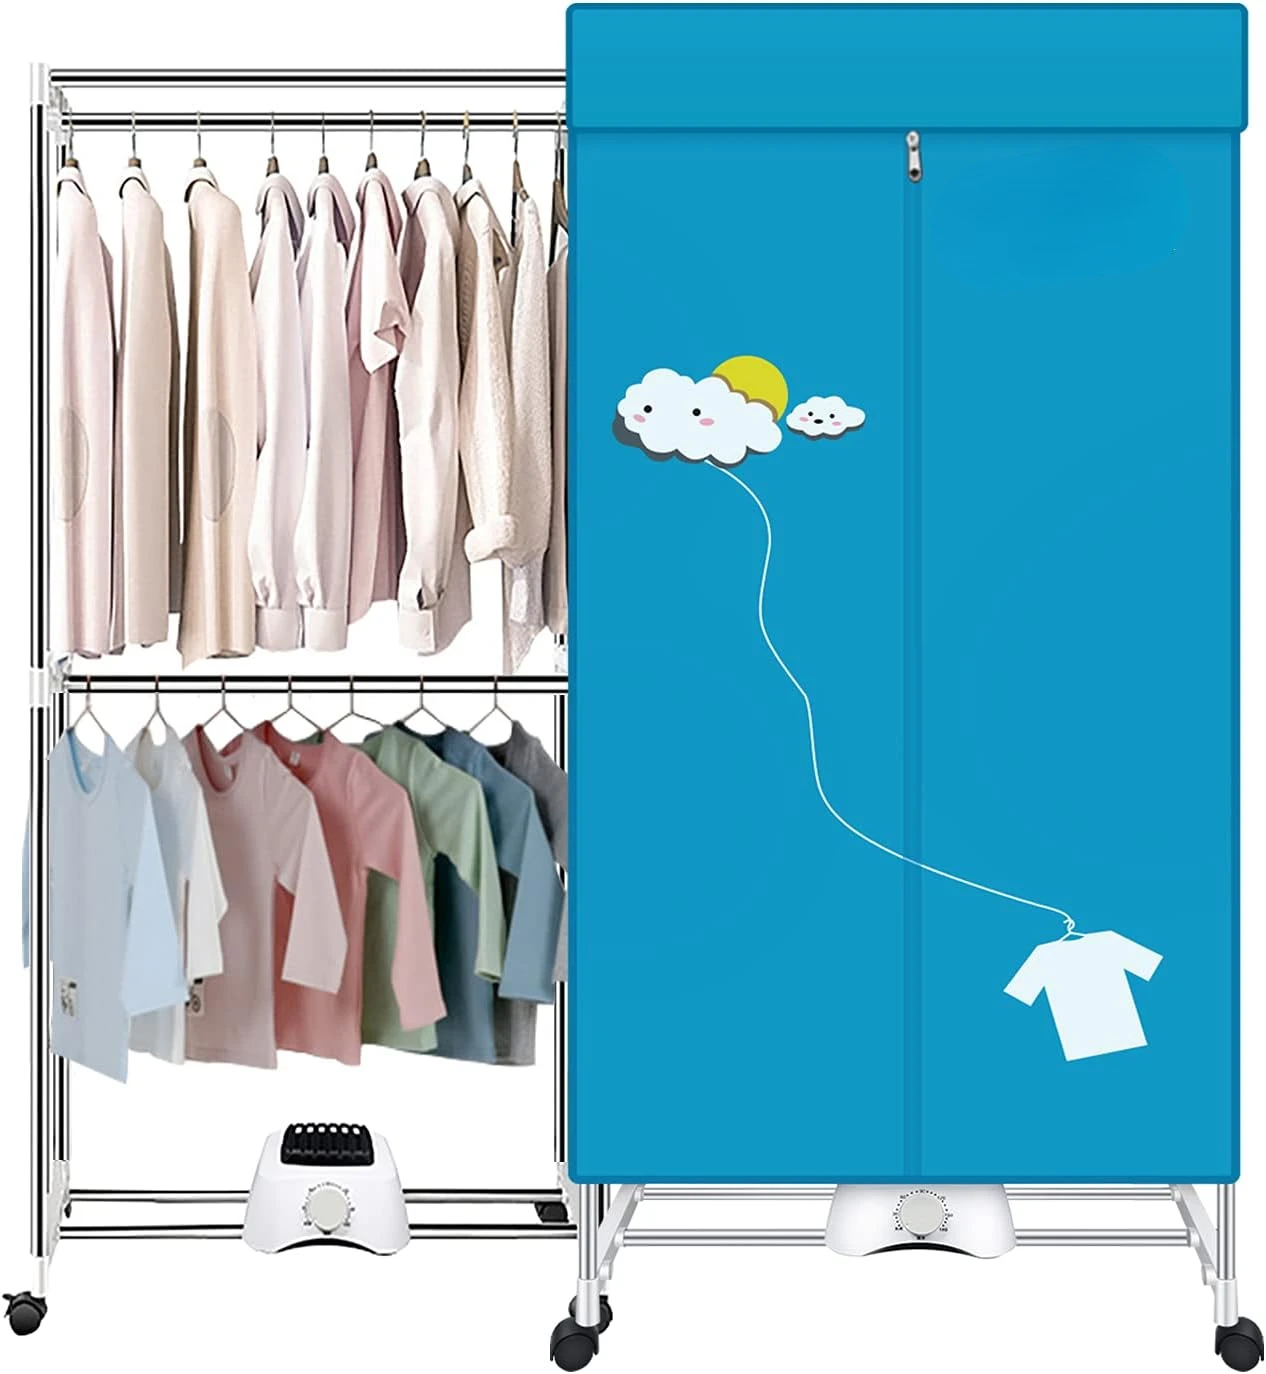 

Dryer,110V 1000W Clothes Dryer Machine Double layer Stackable Clothes Drying for Apartments, RV,Laundry,and More